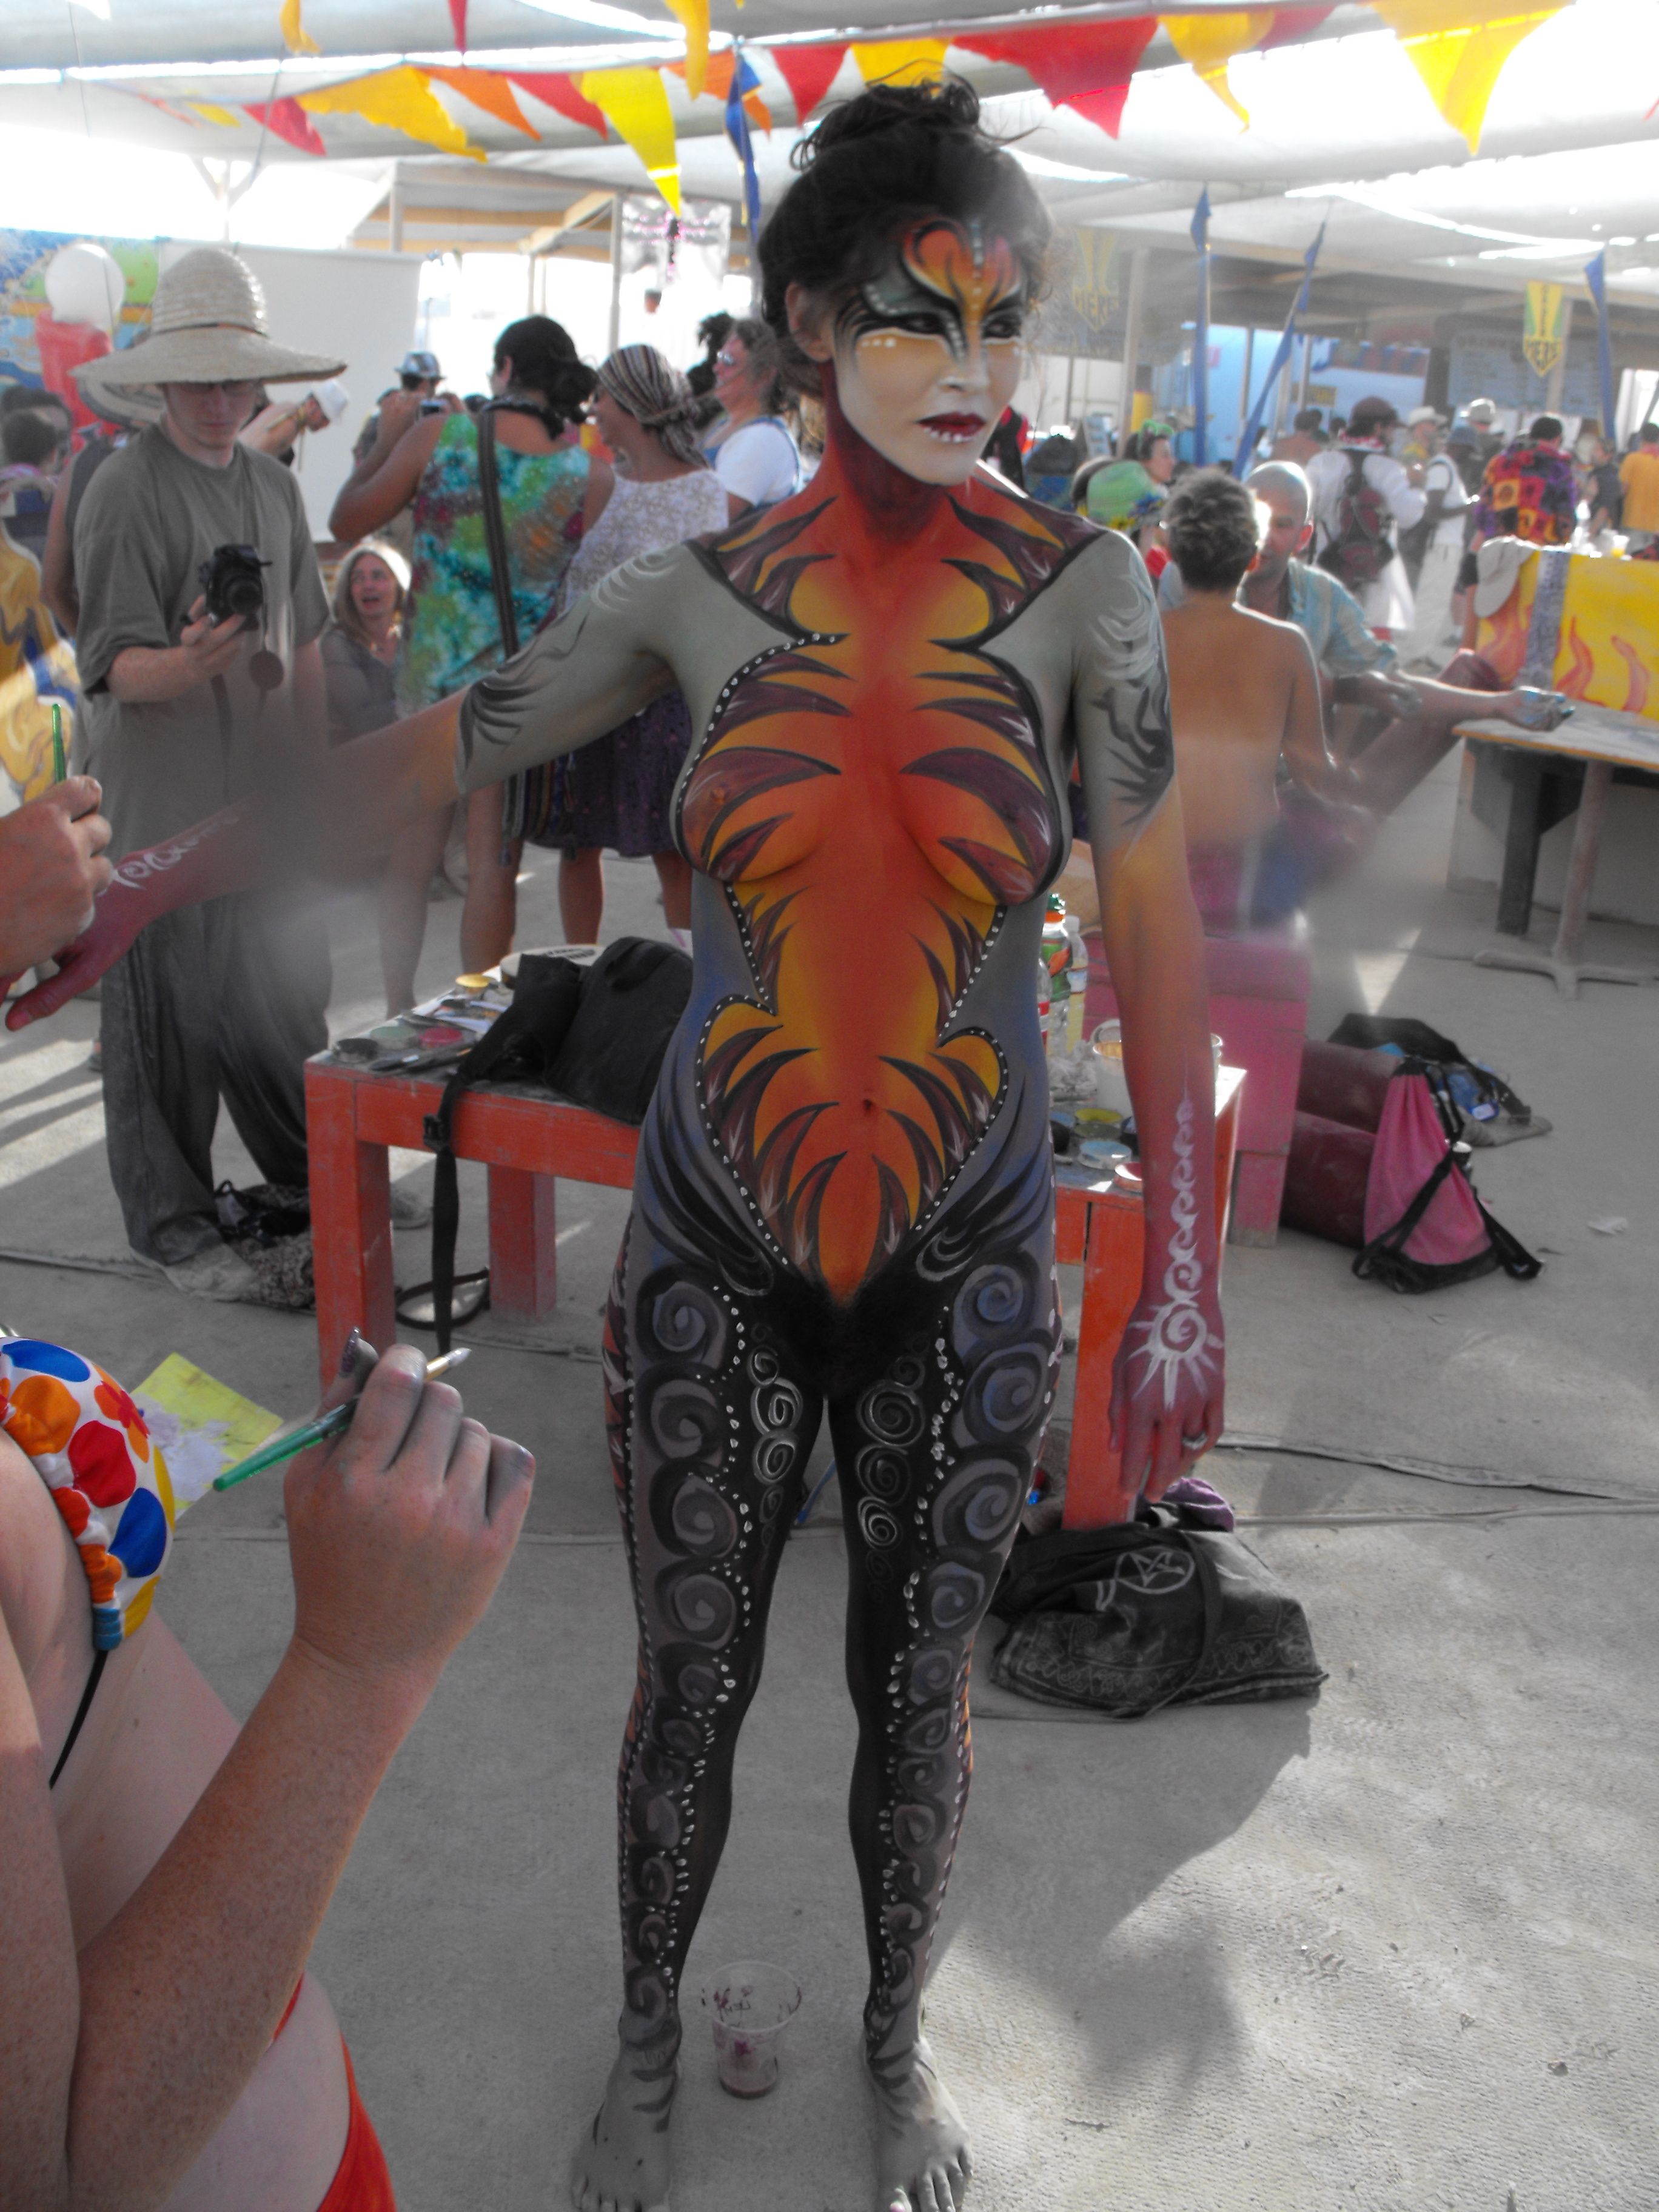 austin port recommends pictures of body painting at the burning man festival pic